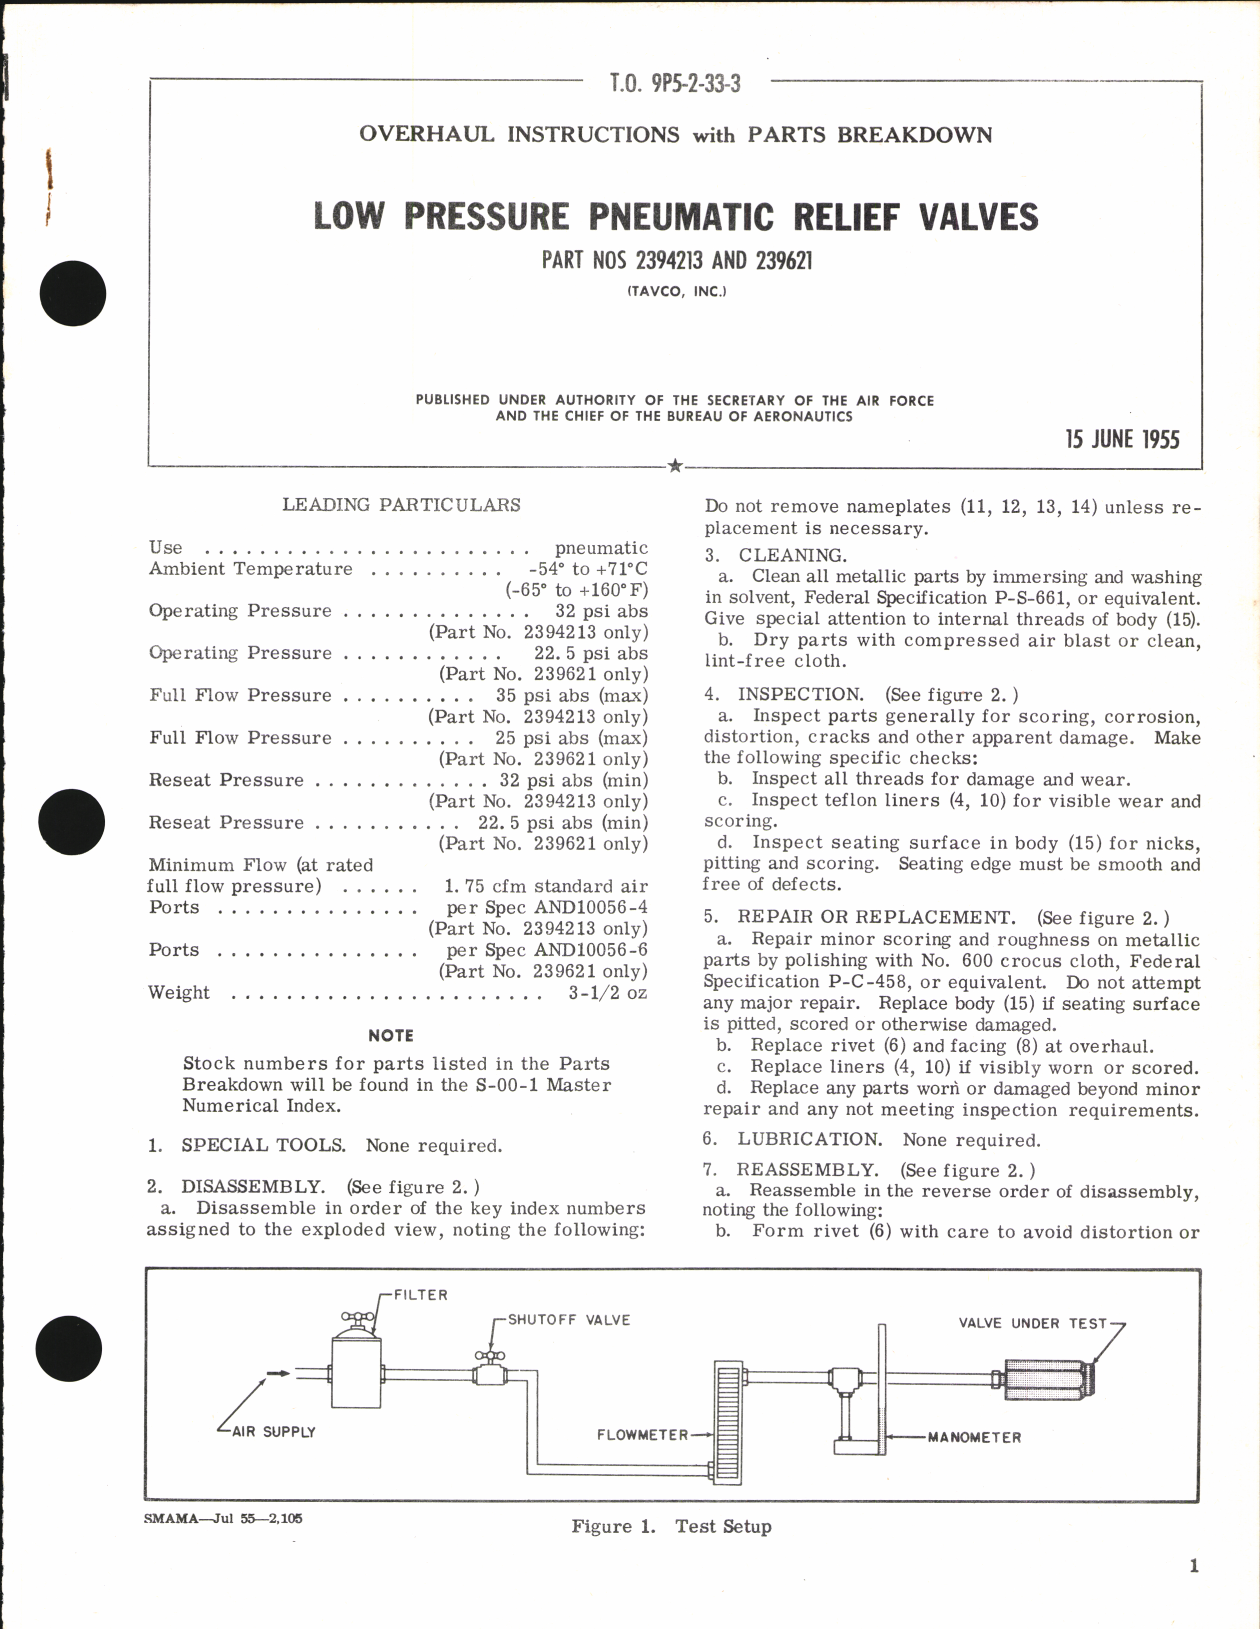 Sample page 1 from AirCorps Library document: Overhaul Instructions with Parts Breakdown for Low Pressure Pneumatic Relief Valves Part No. 2394213, 239621